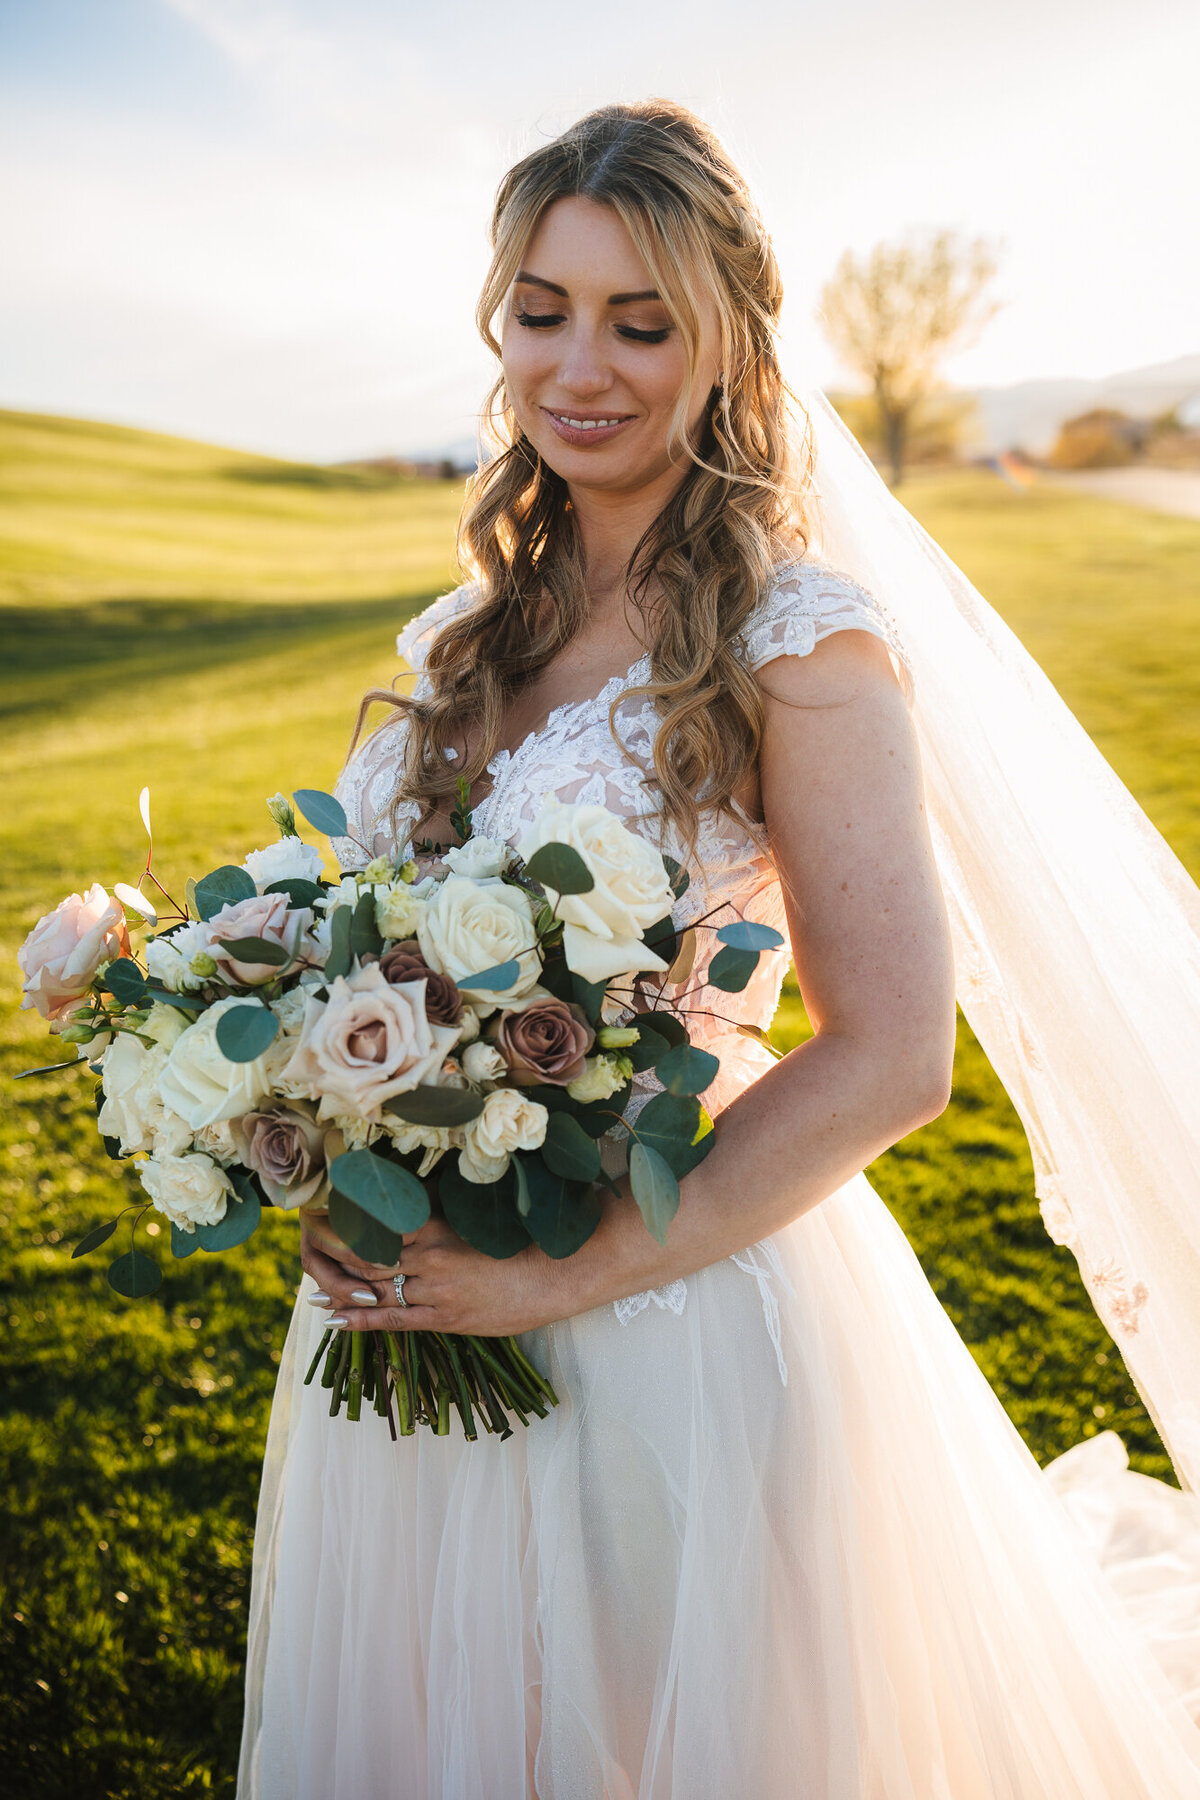 Radiant bride holding her exquisite bouquet of flowers, bathed in the warm glow of a Las Vegas sunset at Revere Golf Club.